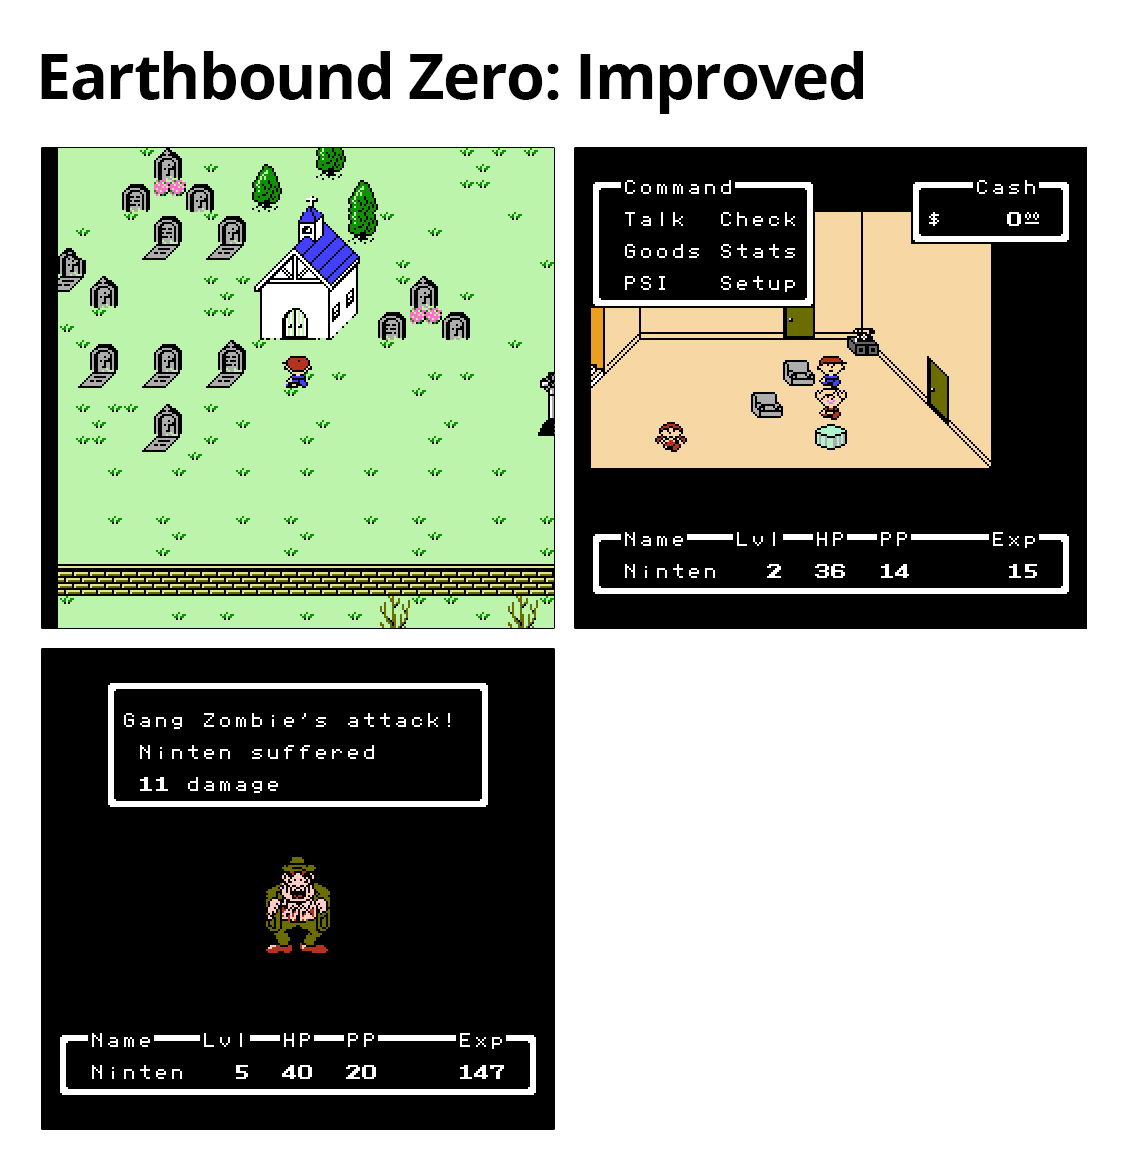 download earthbound trading co